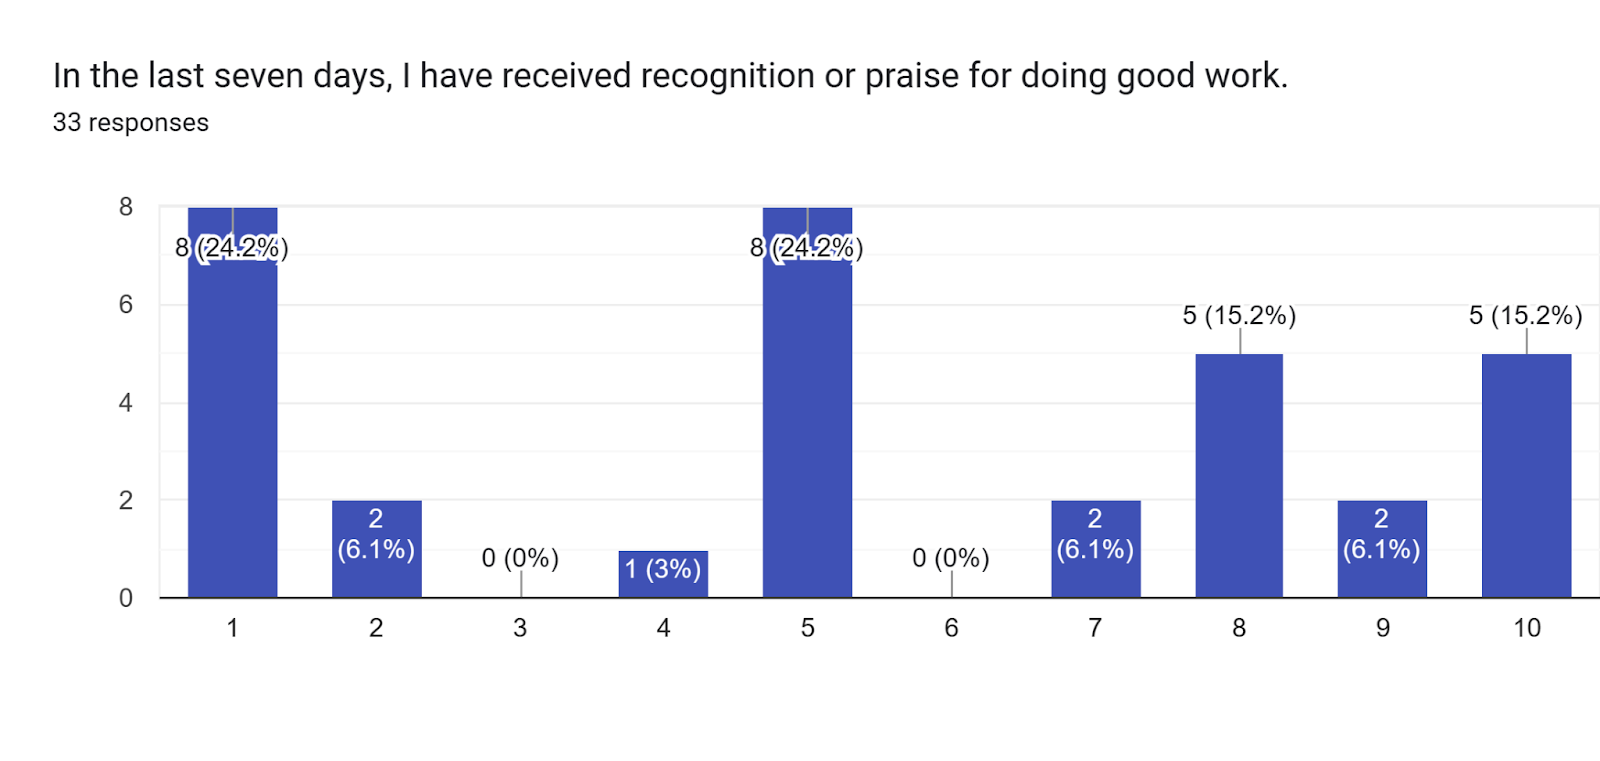 Forms response chart. Question title: In the last seven days, I have received recognition or praise for doing good work.. Number of responses: 33 responses.